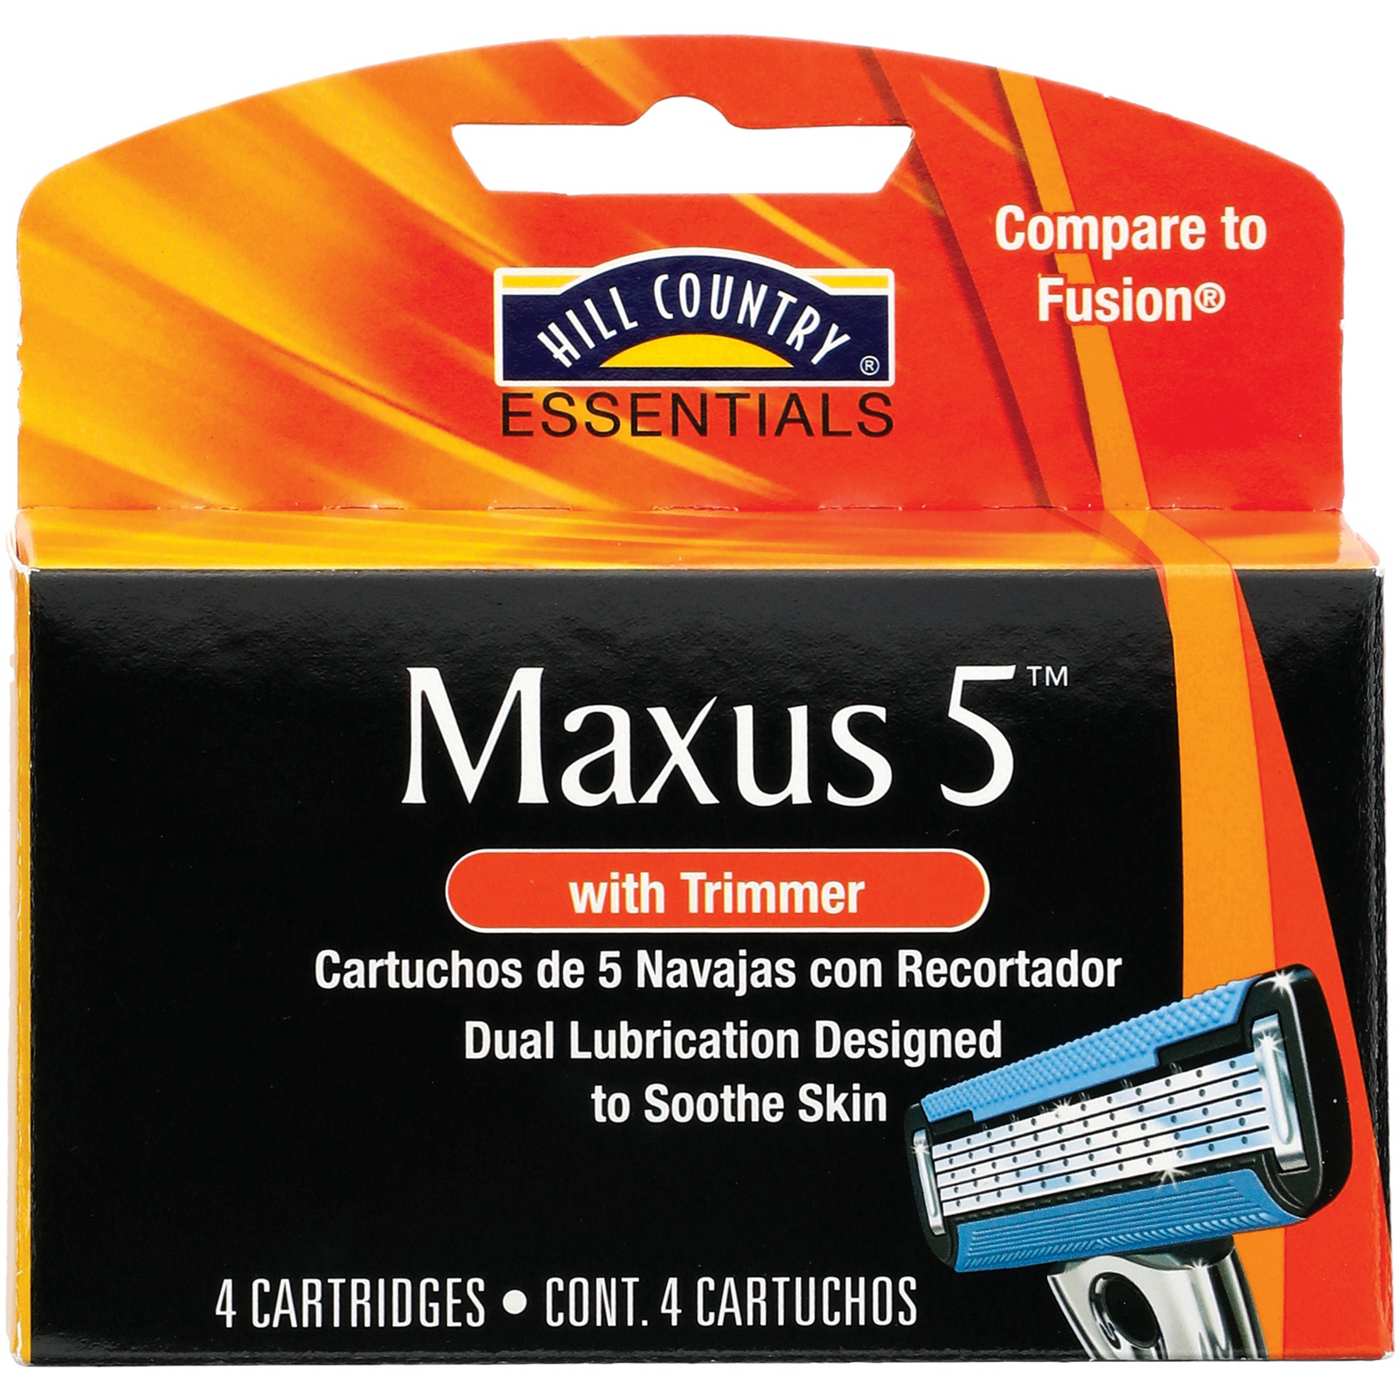 Hill Country Essentials Maxus 5 Cartridges with Trimmer; image 1 of 5